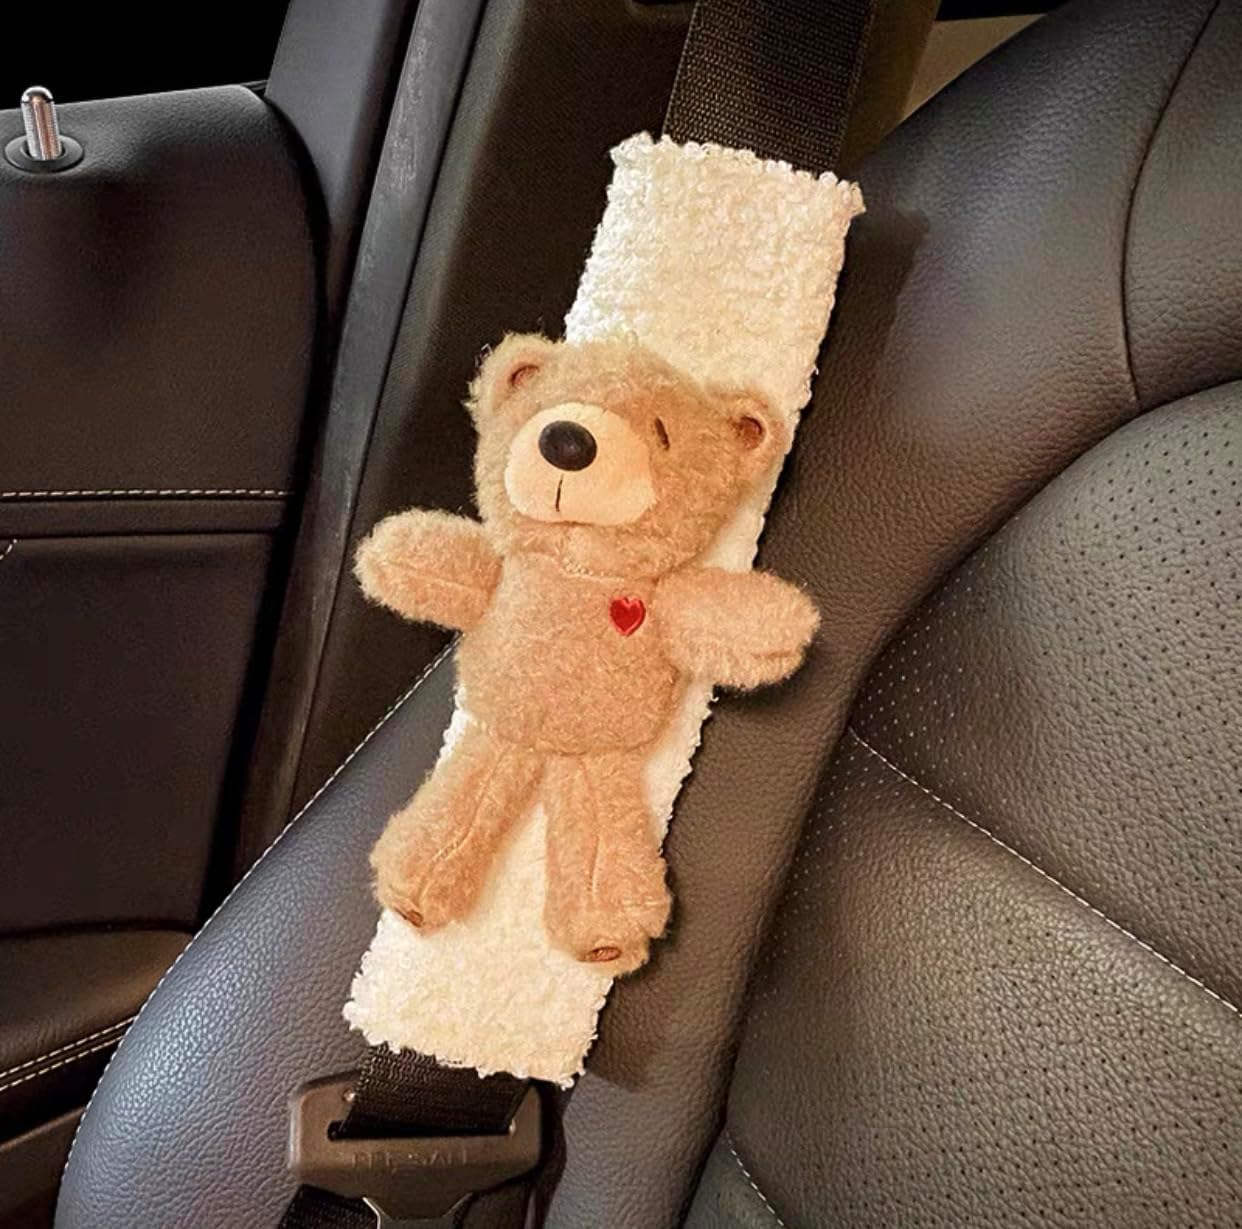 Cute Fuzzy Cover, Seat Belt Cover